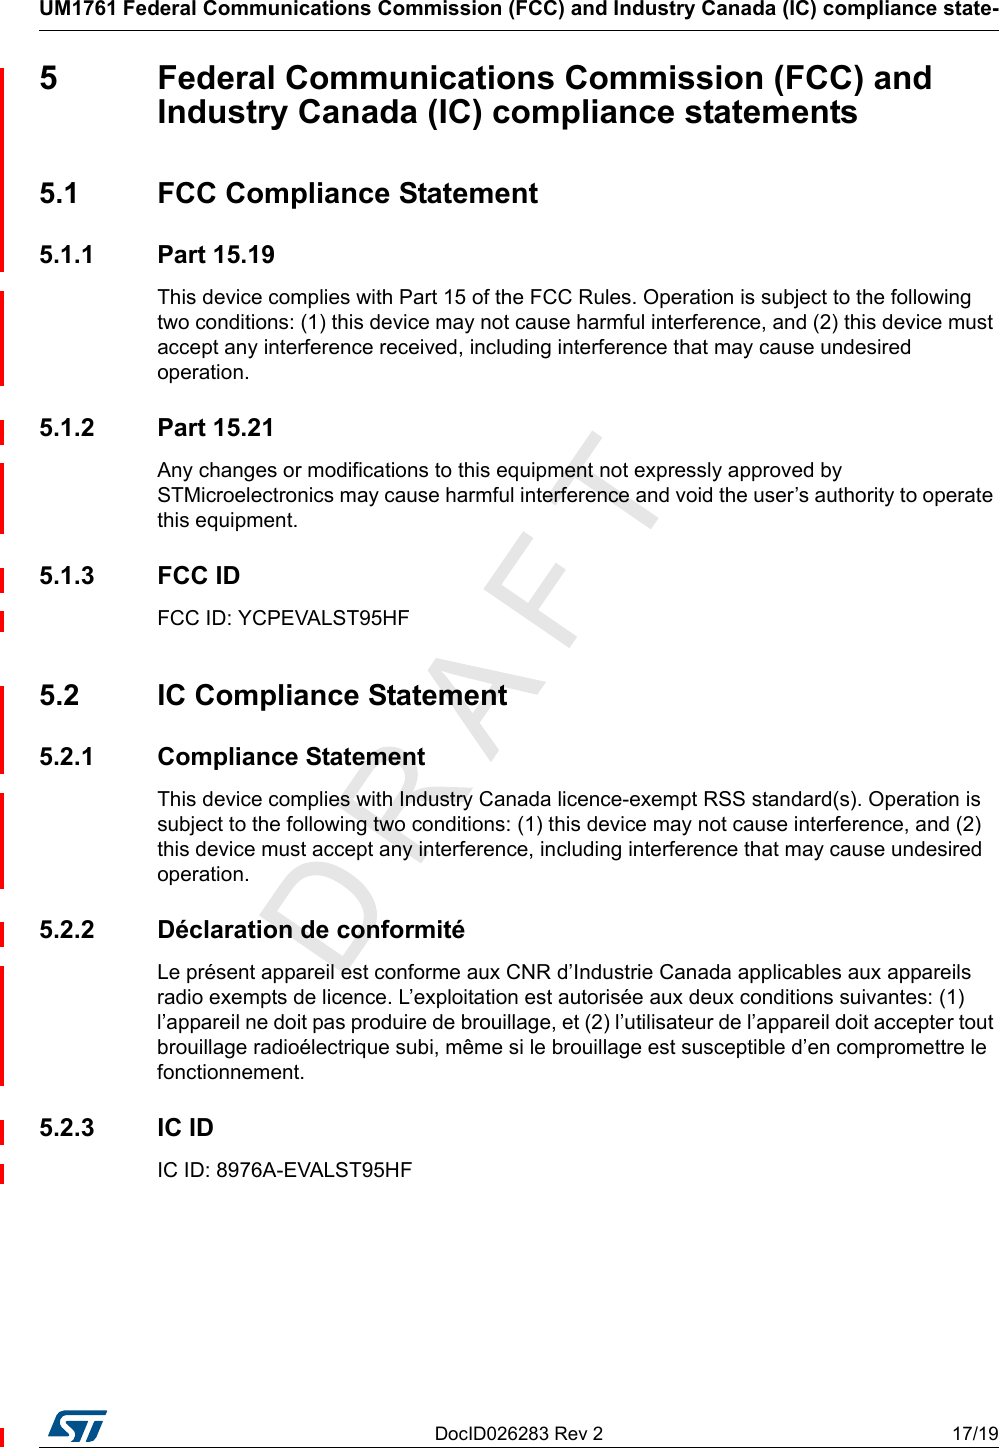 DocID026283 Rev 2 17/19UM1761 Federal Communications Commission (FCC) and Industry Canada (IC) compliance state-185  Federal Communications Commission (FCC) and Industry Canada (IC) compliance statements5.1  FCC Compliance Statement5.1.1 Part 15.19This device complies with Part 15 of the FCC Rules. Operation is subject to the following two conditions: (1) this device may not cause harmful interference, and (2) this device must accept any interference received, including interference that may cause undesired operation.5.1.2 Part 15.21Any changes or modifications to this equipment not expressly approved by STMicroelectronics may cause harmful interference and void the user’s authority to operate this equipment.5.1.3 FCC IDFCC ID: YCPEVALST95HF5.2  IC Compliance Statement5.2.1 Compliance StatementThis device complies with Industry Canada licence-exempt RSS standard(s). Operation is subject to the following two conditions: (1) this device may not cause interference, and (2) this device must accept any interference, including interference that may cause undesired operation.5.2.2  Déclaration de conformitéLe présent appareil est conforme aux CNR d’Industrie Canada applicables aux appareils radio exempts de licence. L’exploitation est autorisée aux deux conditions suivantes: (1) l’appareil ne doit pas produire de brouillage, et (2) l’utilisateur de l’appareil doit accepter tout brouillage radioélectrique subi, même si le brouillage est susceptible d’en compromettre le fonctionnement.5.2.3 IC IDIC ID: 8976A-EVALST95HF